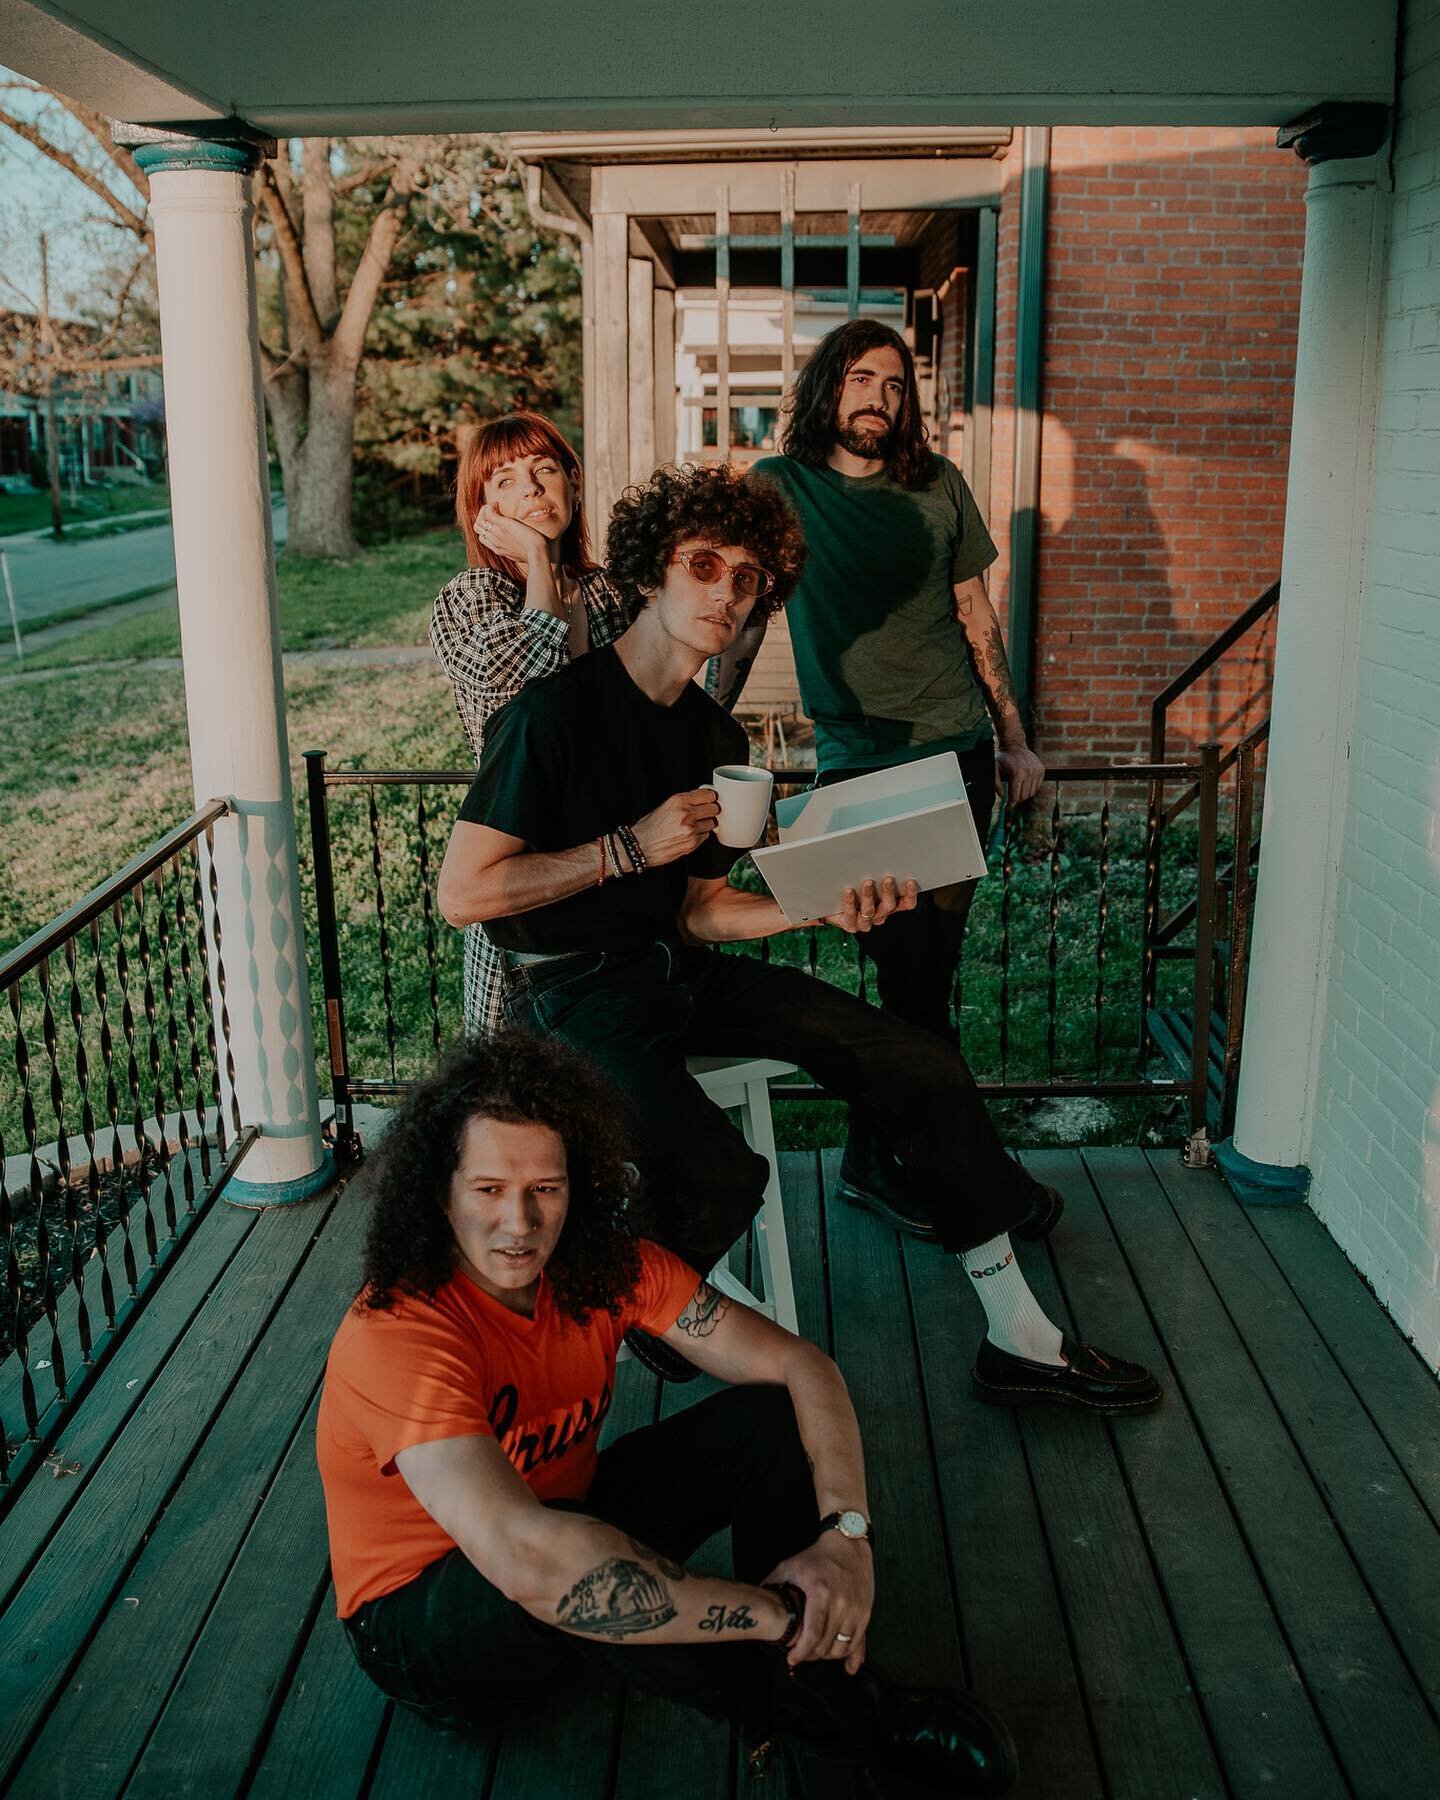 today these 4 go to europe for a month of tour. starts saturday at @warmupfestival in murcia, spain. slide 2 for all dates. slide 3 for how to make one million dollars in ONE day. C U OUT THERE 📷 @mdillyphoto